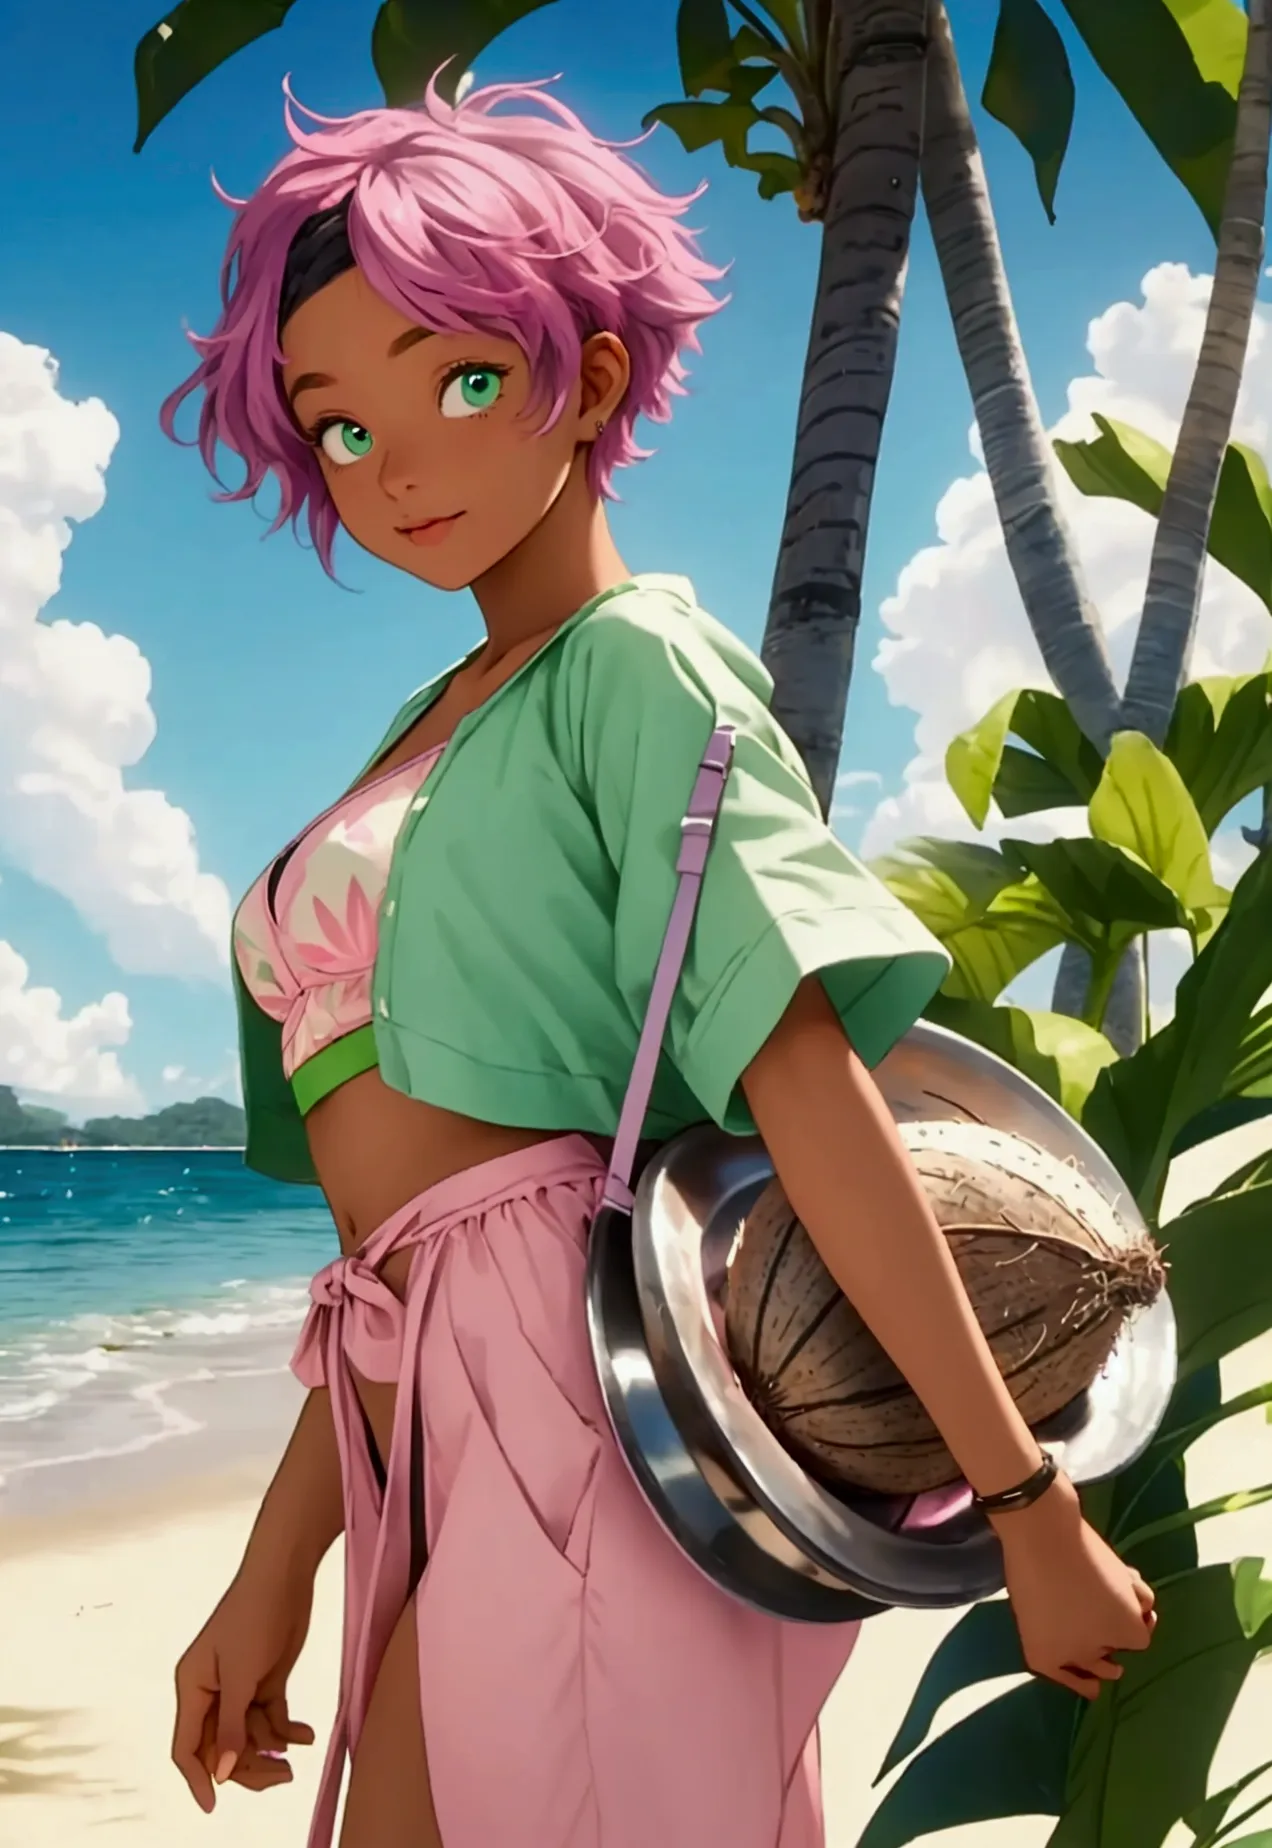 ((Artwork, high quality)), (black girl), (pink hair), (green eyes), (wearing a beach outfit), (at a large party), (with a coconu...